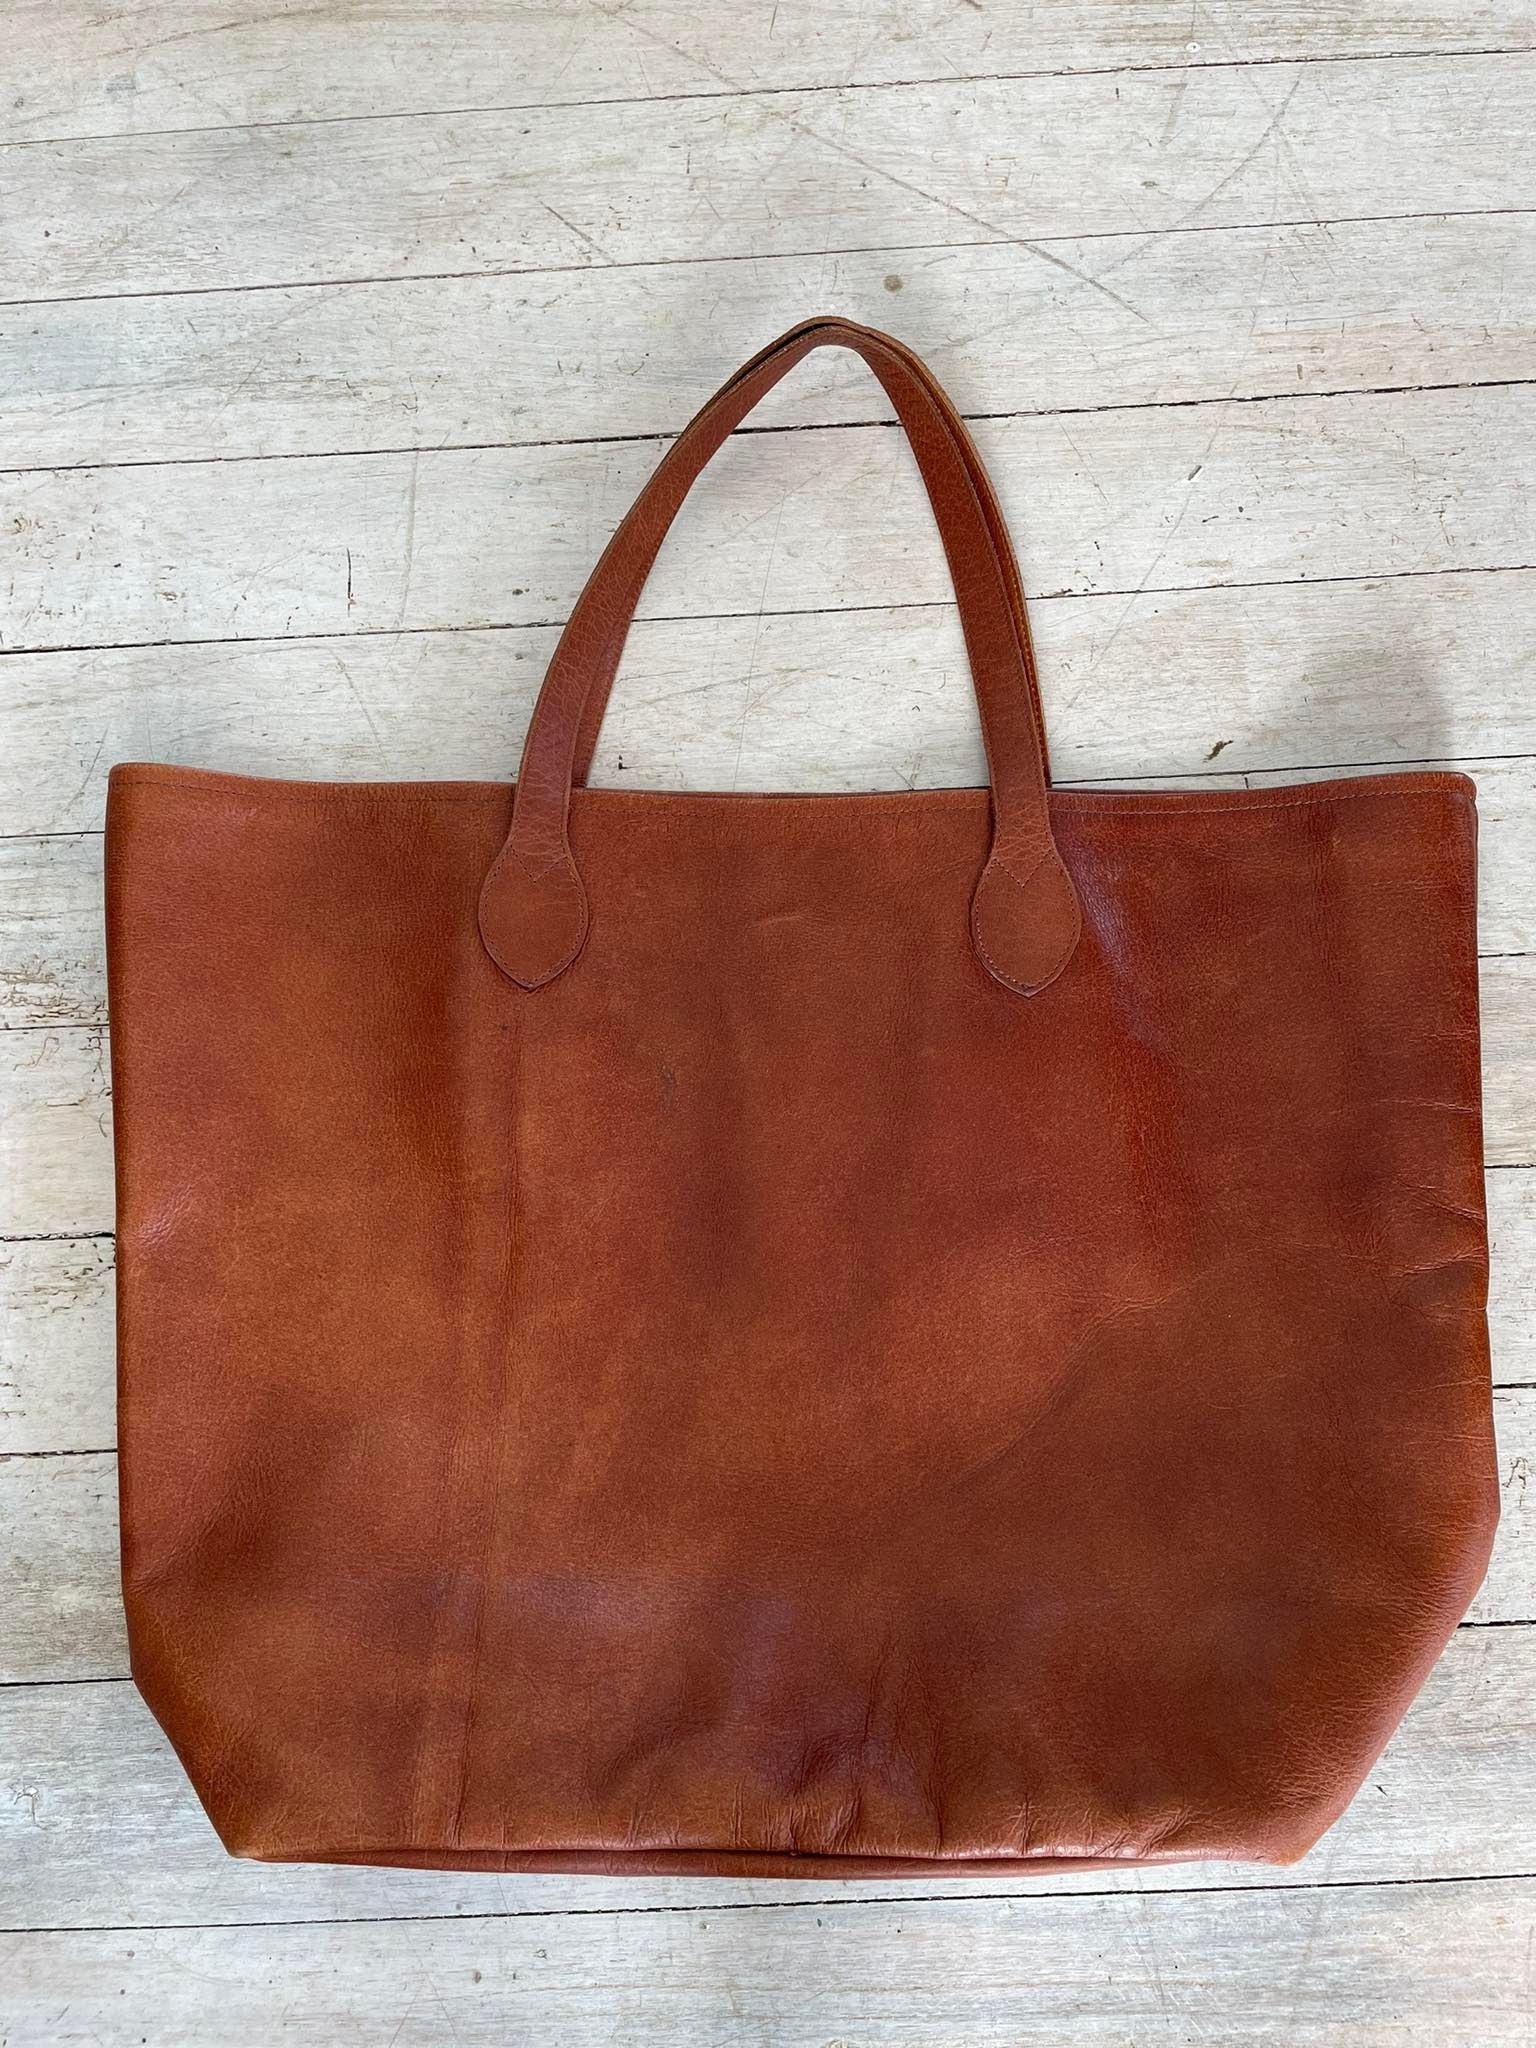 3. Pure Leather Bag